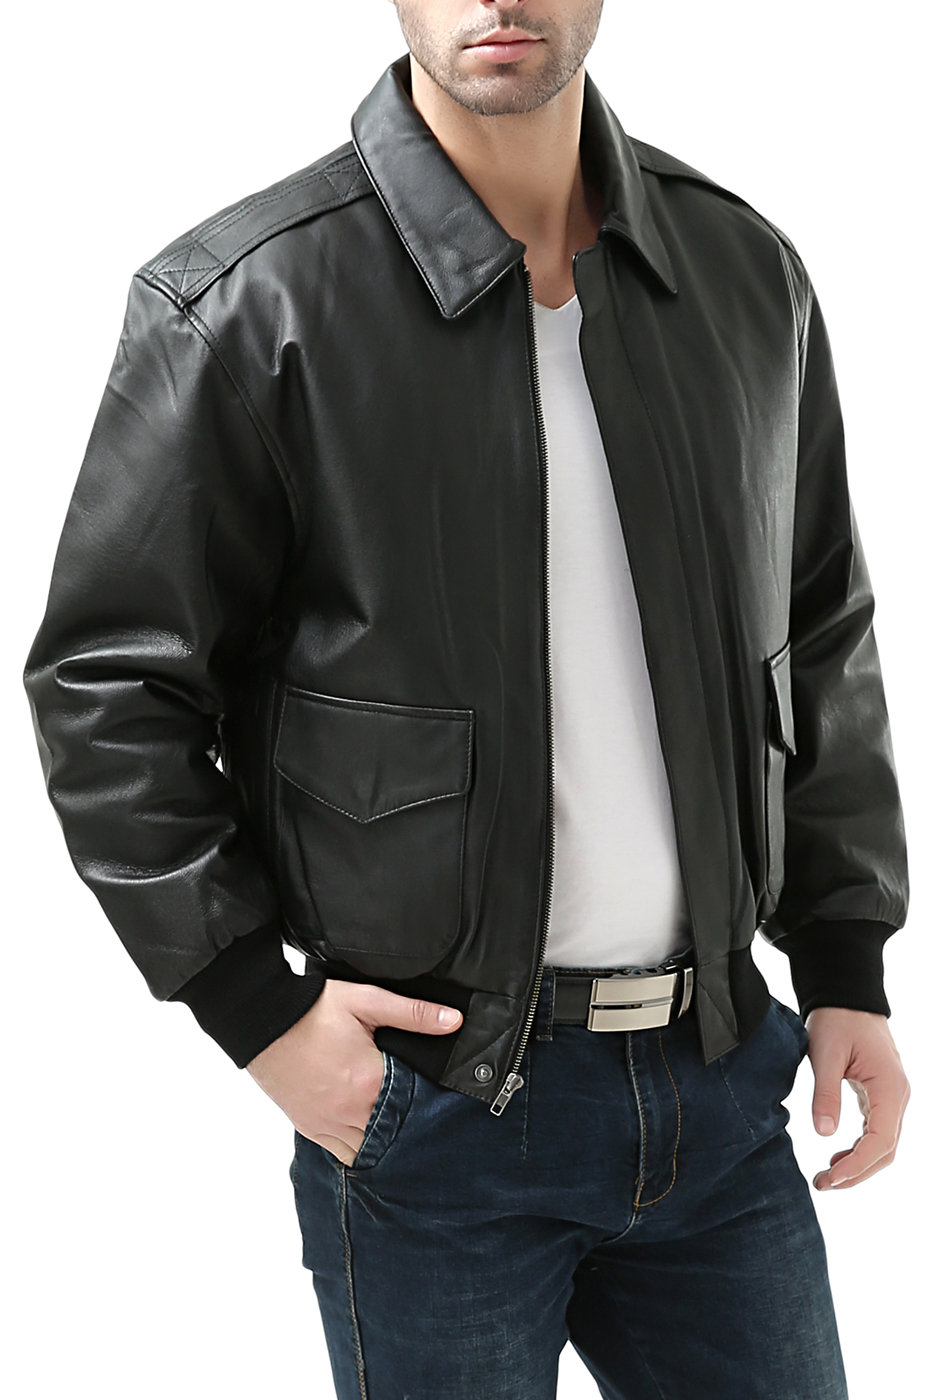 Landing Leathers Mens Air Force A-2 Leather Flight Bomber Jacket (Regular & Tall) - image 2 of 7